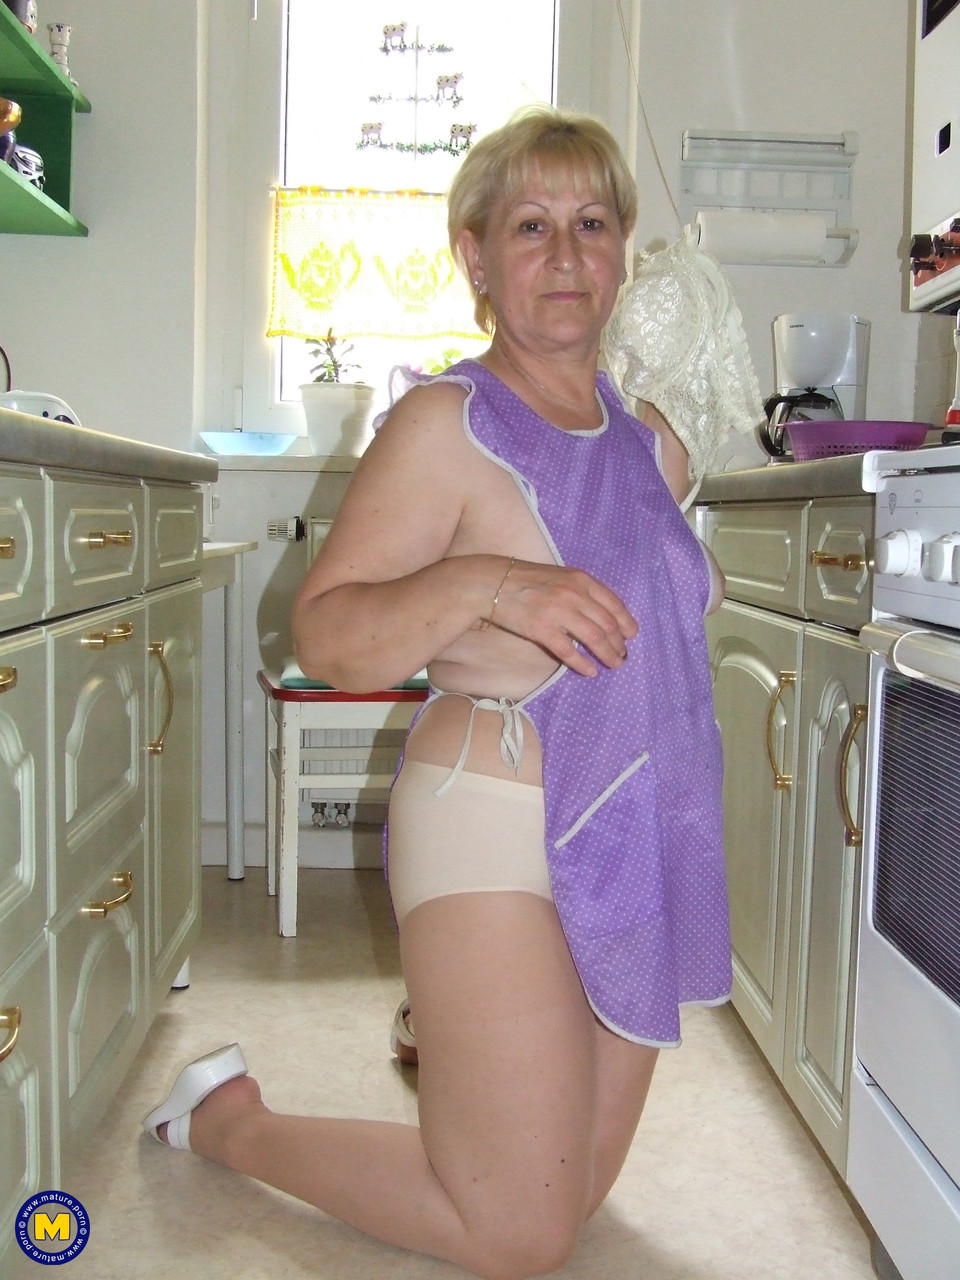 Short haired German cleaning lady Dagmar shows her mature cunt in the kitchen porn photo #425226963 | Mature NL Pics, Dagmar, German, mobile porn